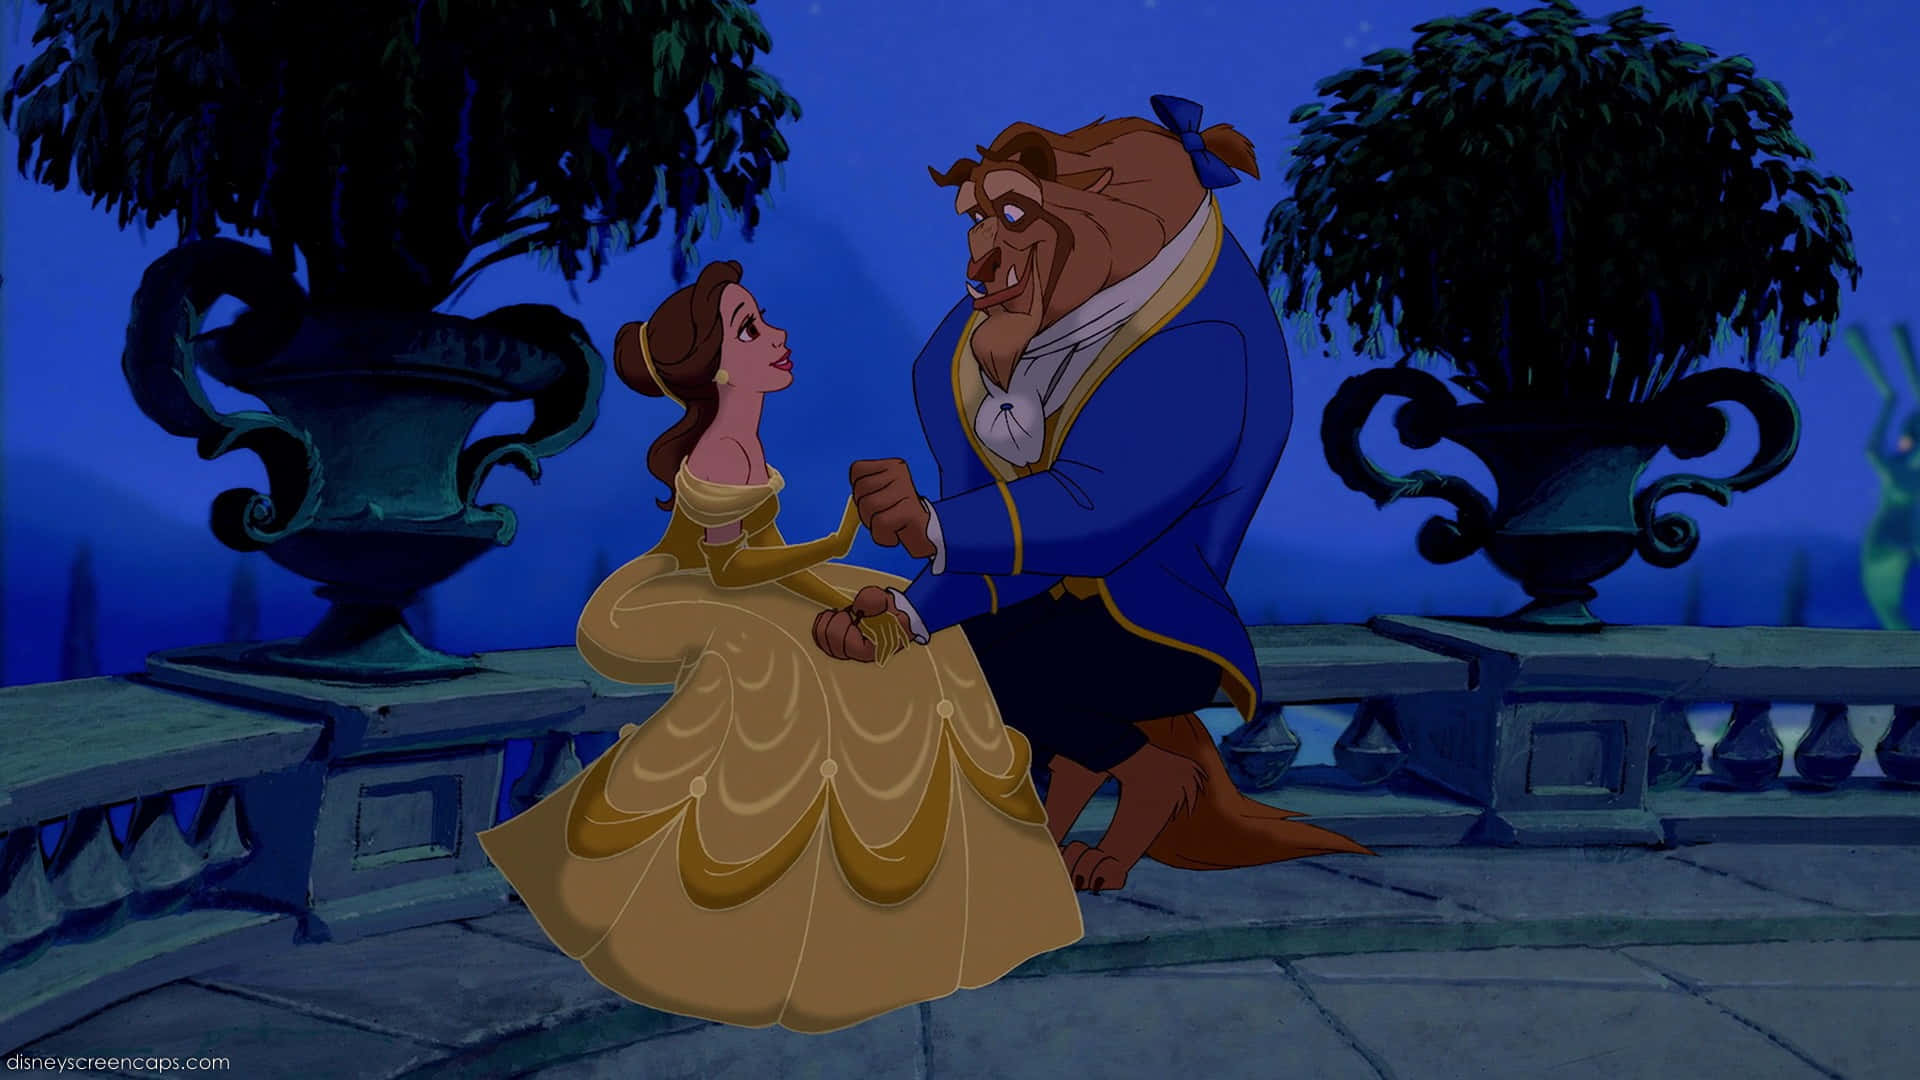 Beauty and the Beast, the classic fairytale returns to the big screen